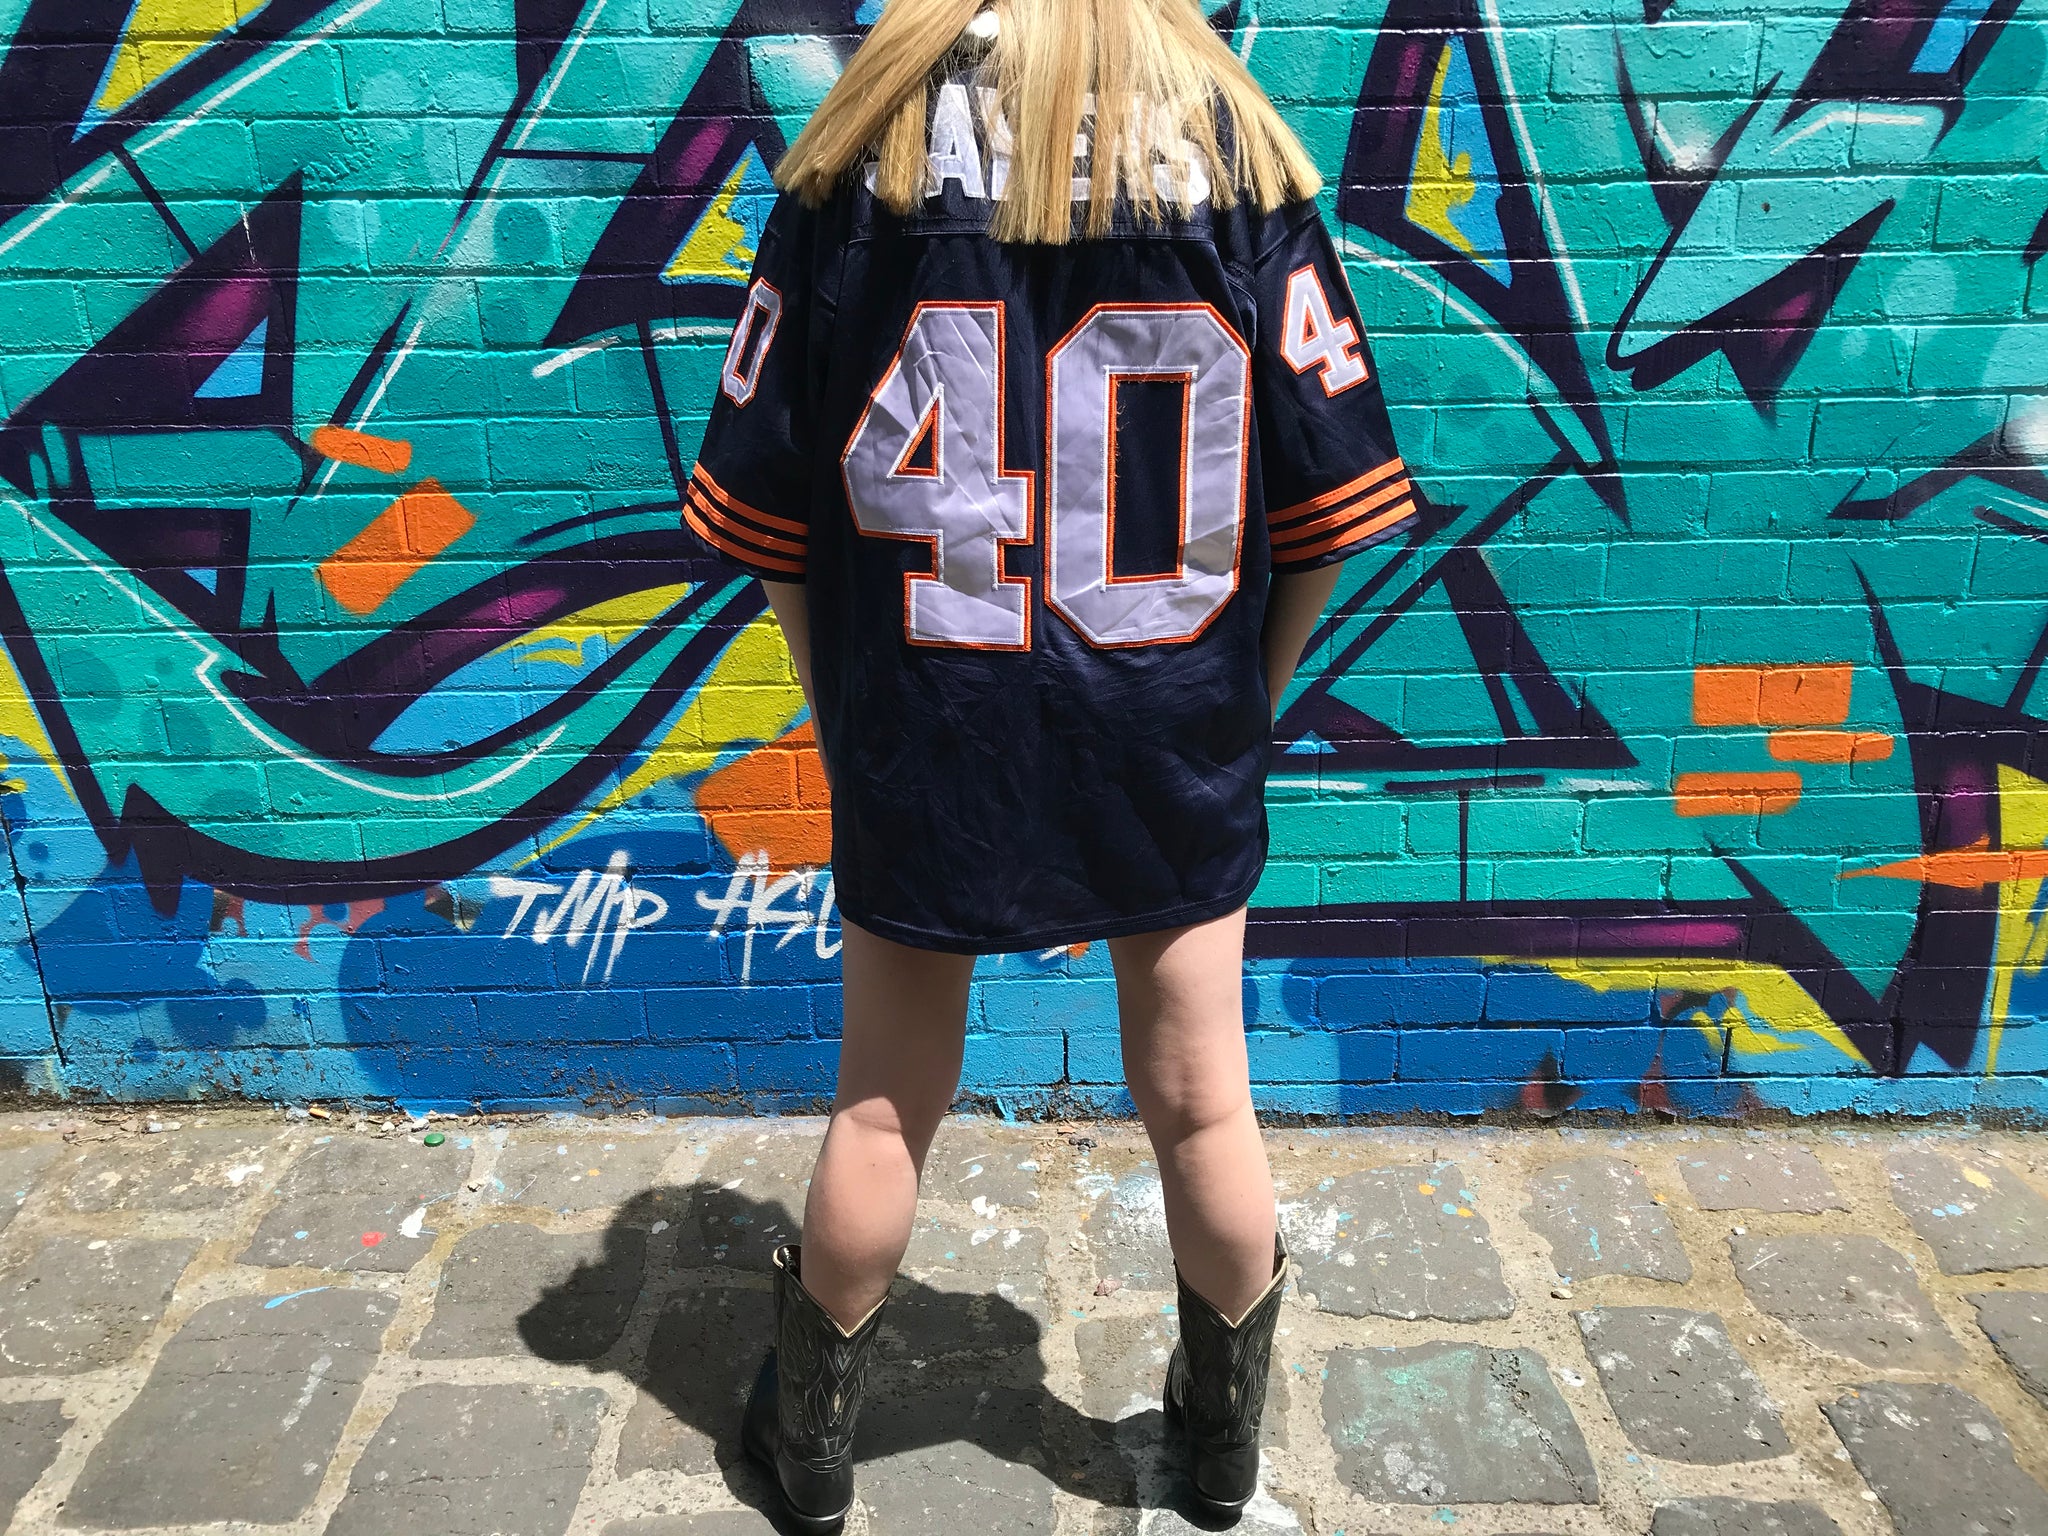 90's oversized jersey outfit